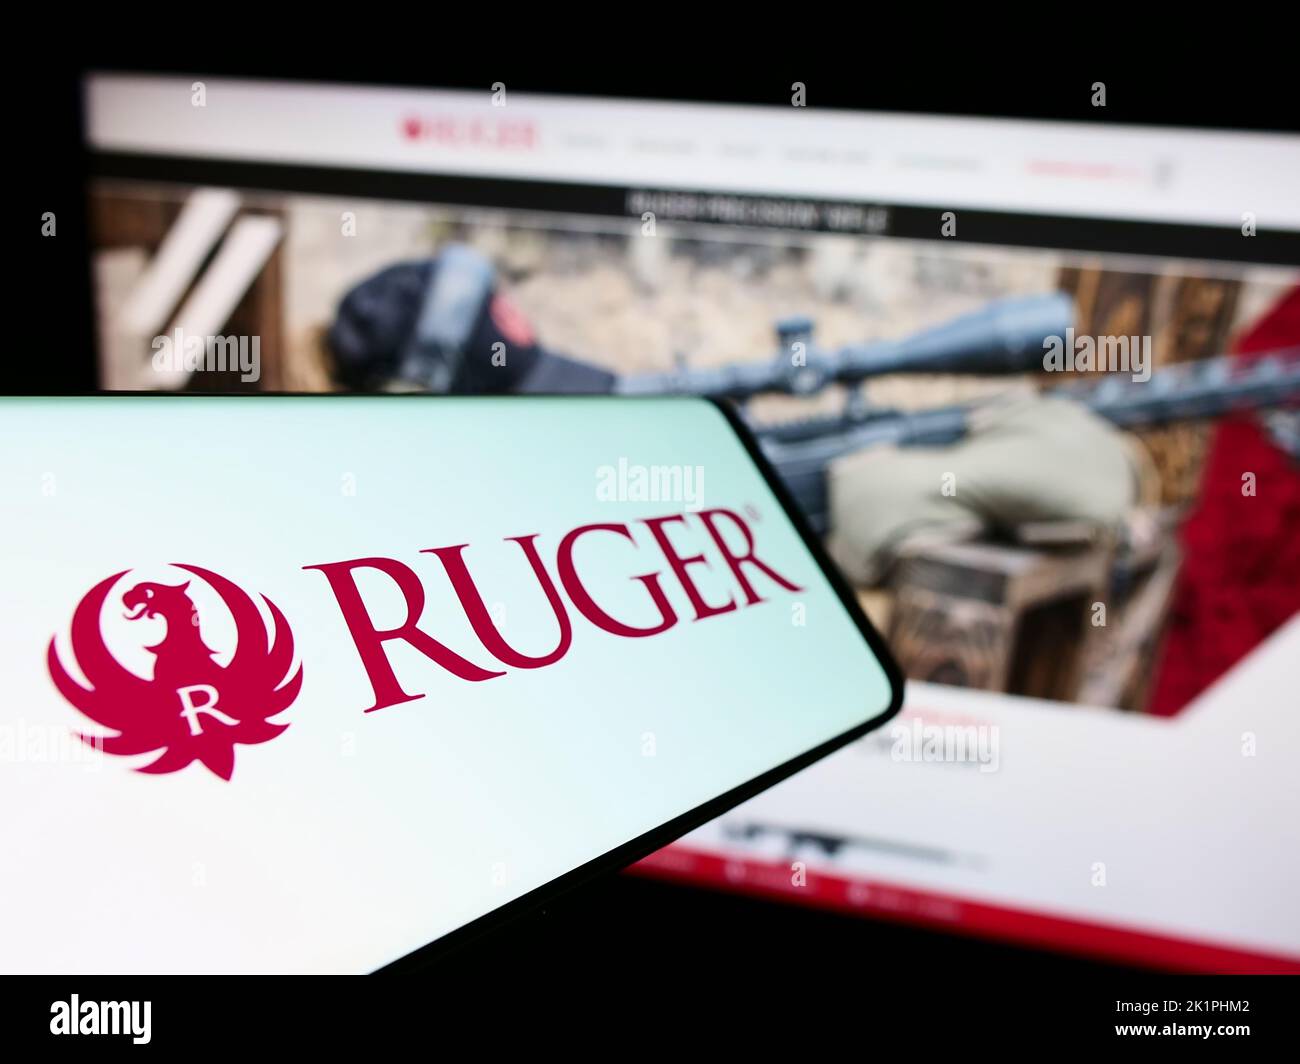 Cellphone with logo of American company Sturm, Ruger and Company Inc. on screen in front of website. Focus on center-left of phone display. Stock Photo